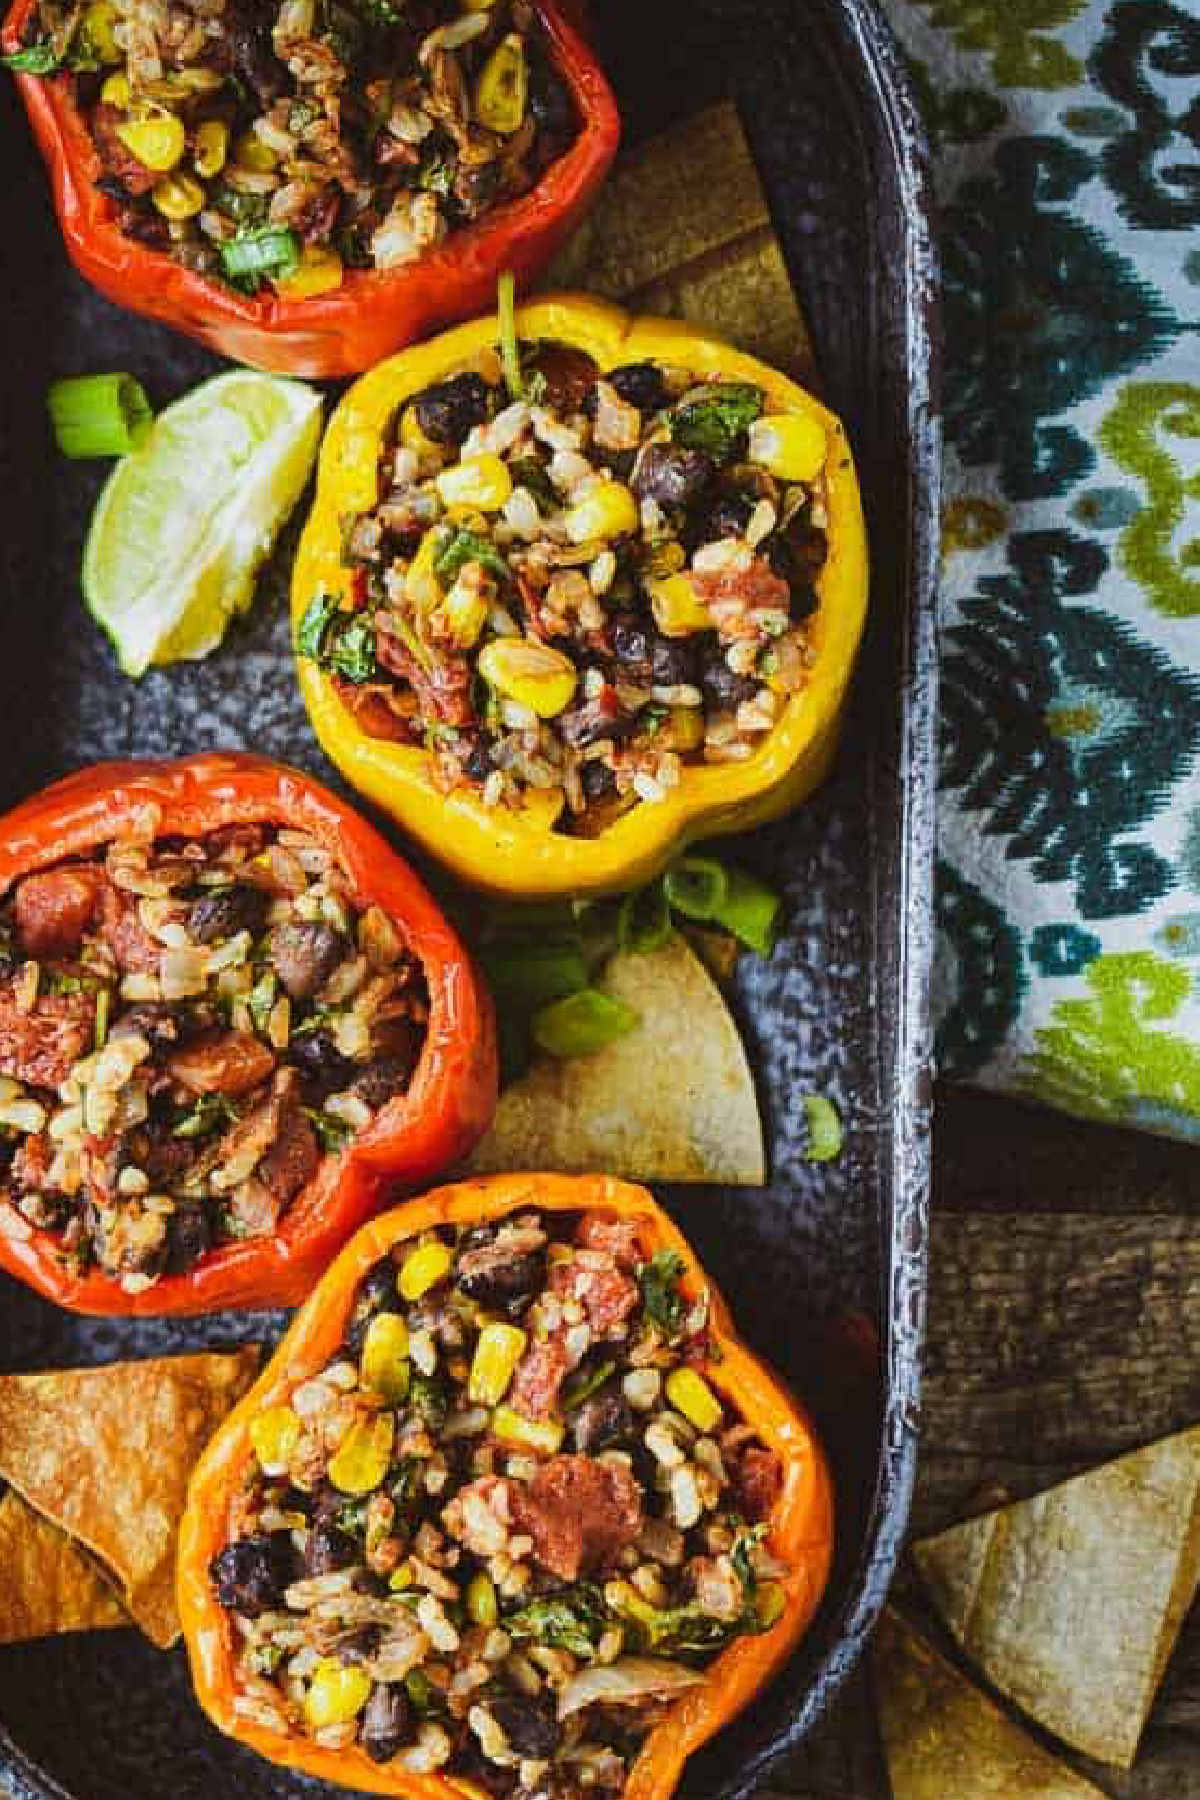 Cheap Party Food Ideas - Stuffed Bell Peppers with Rice and Beans